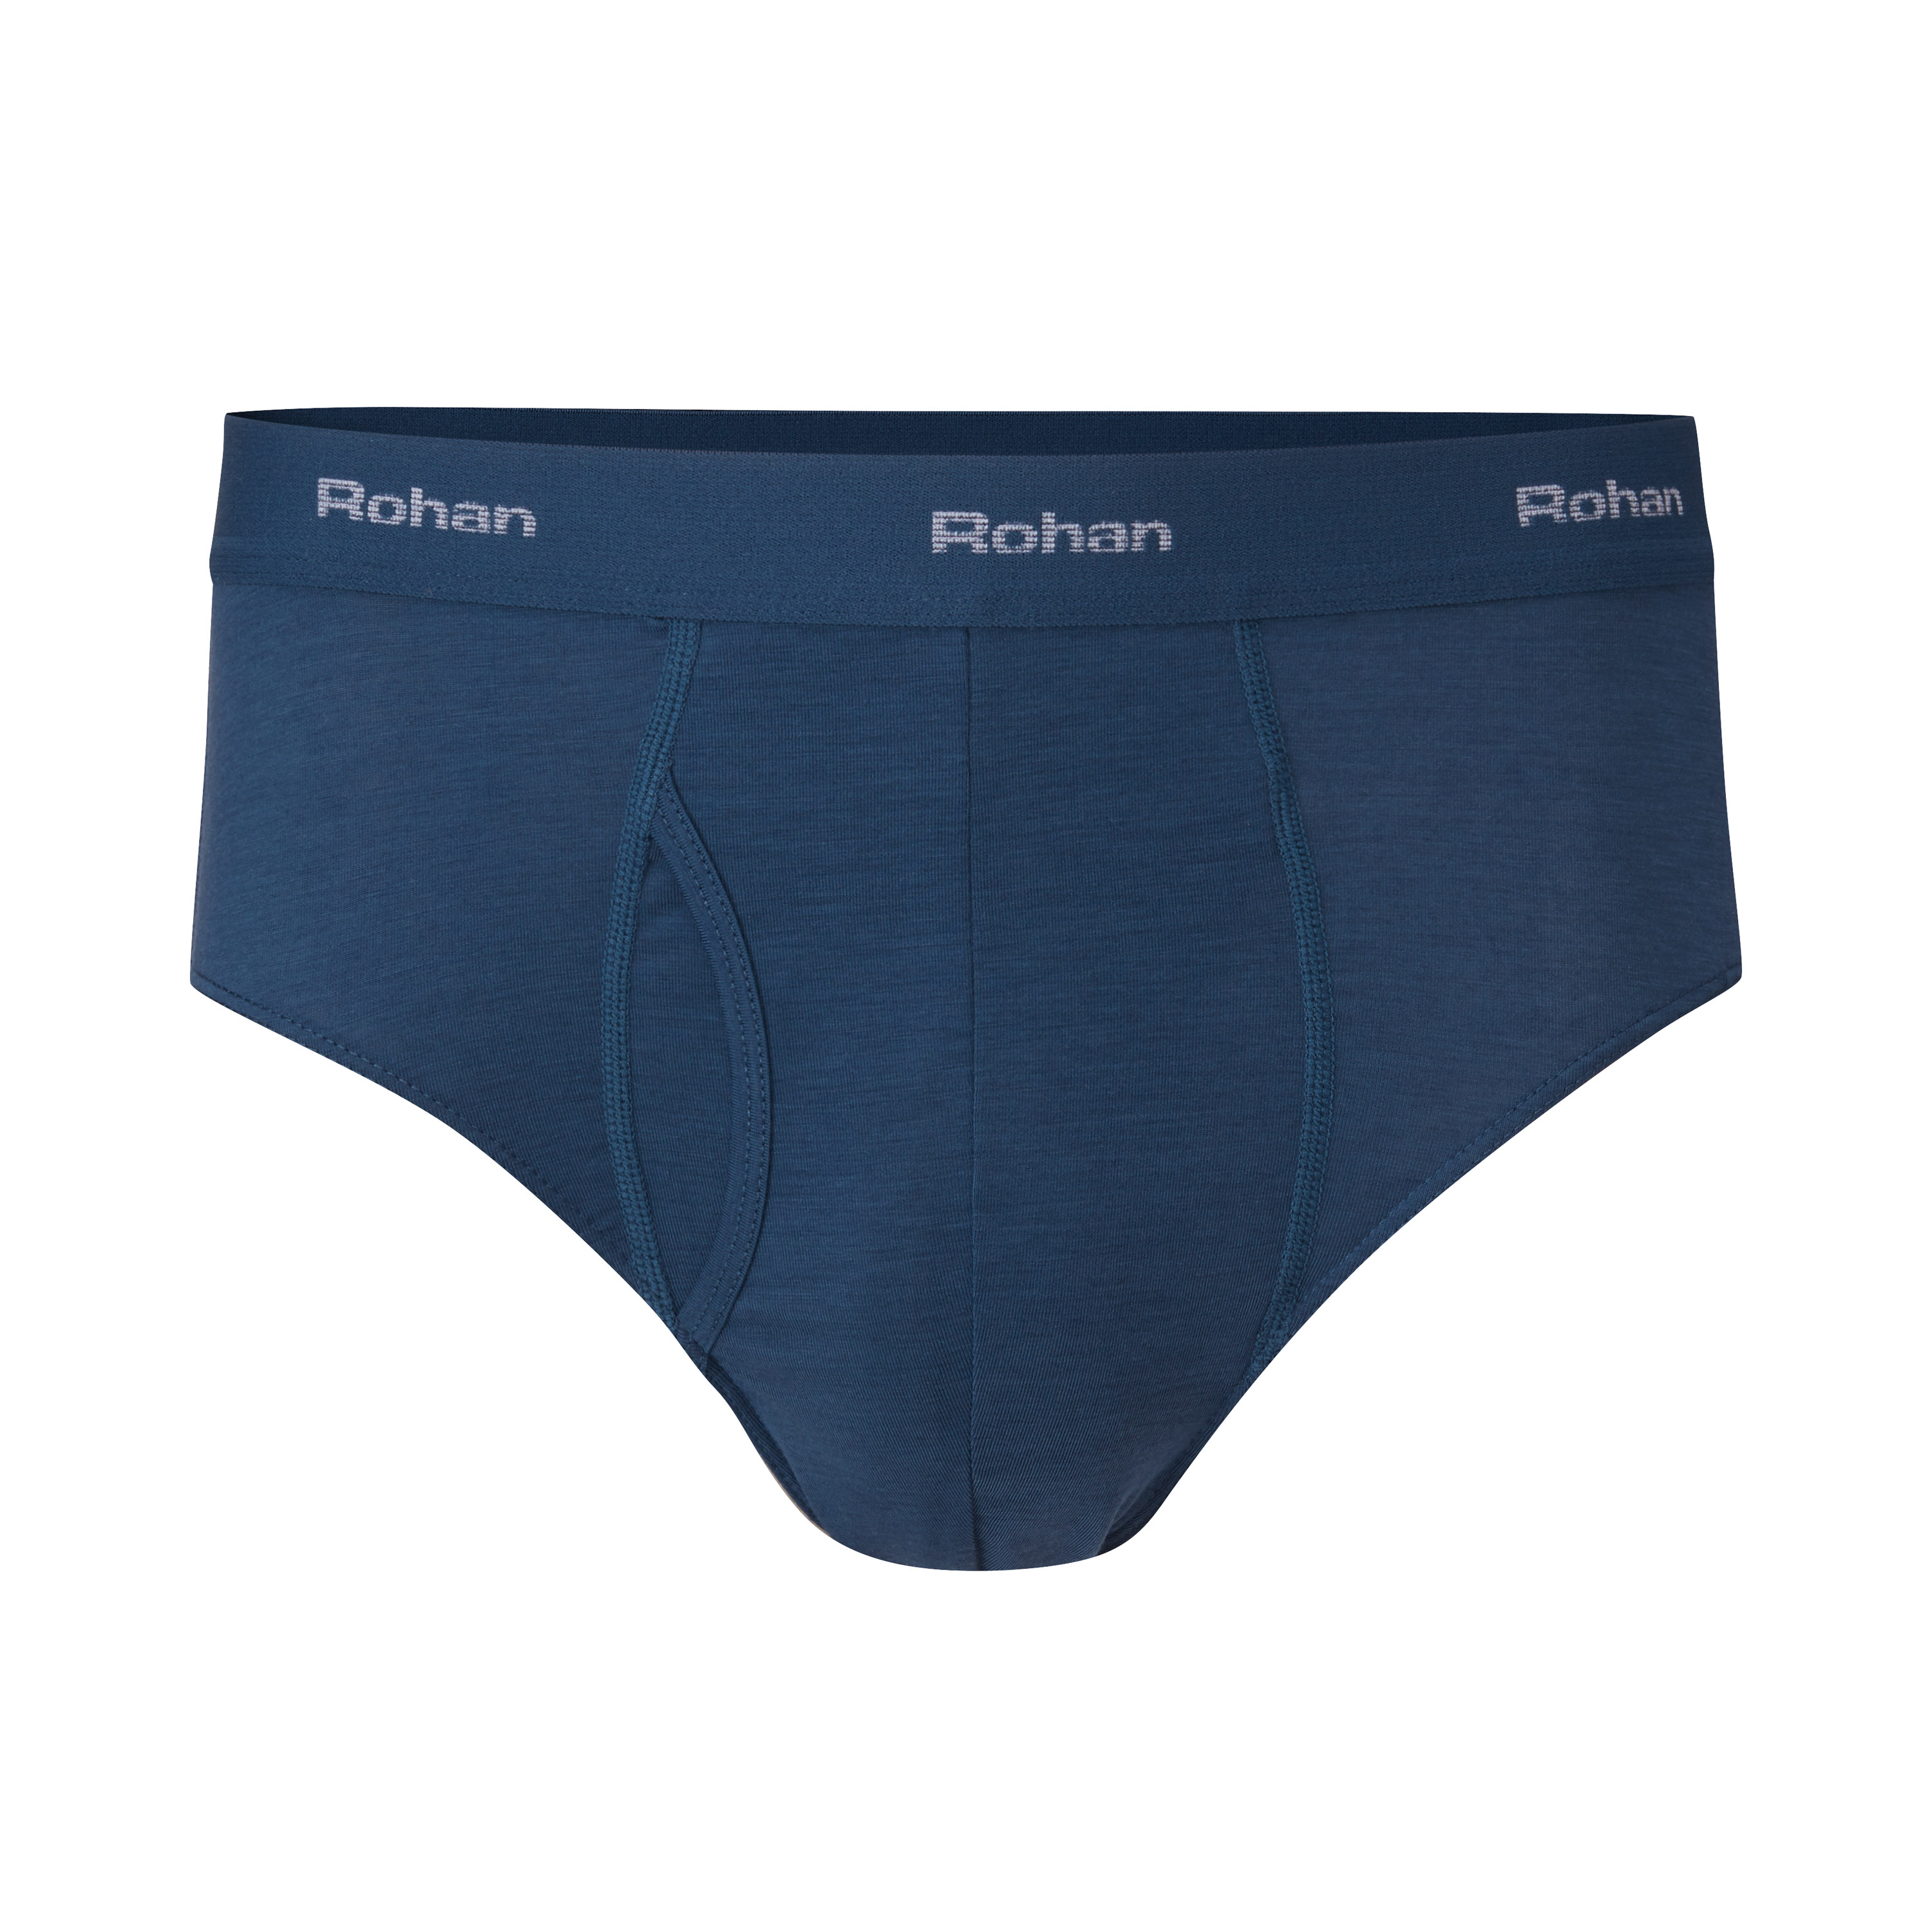 

Rohan Men's Aether Briefs with fly opening